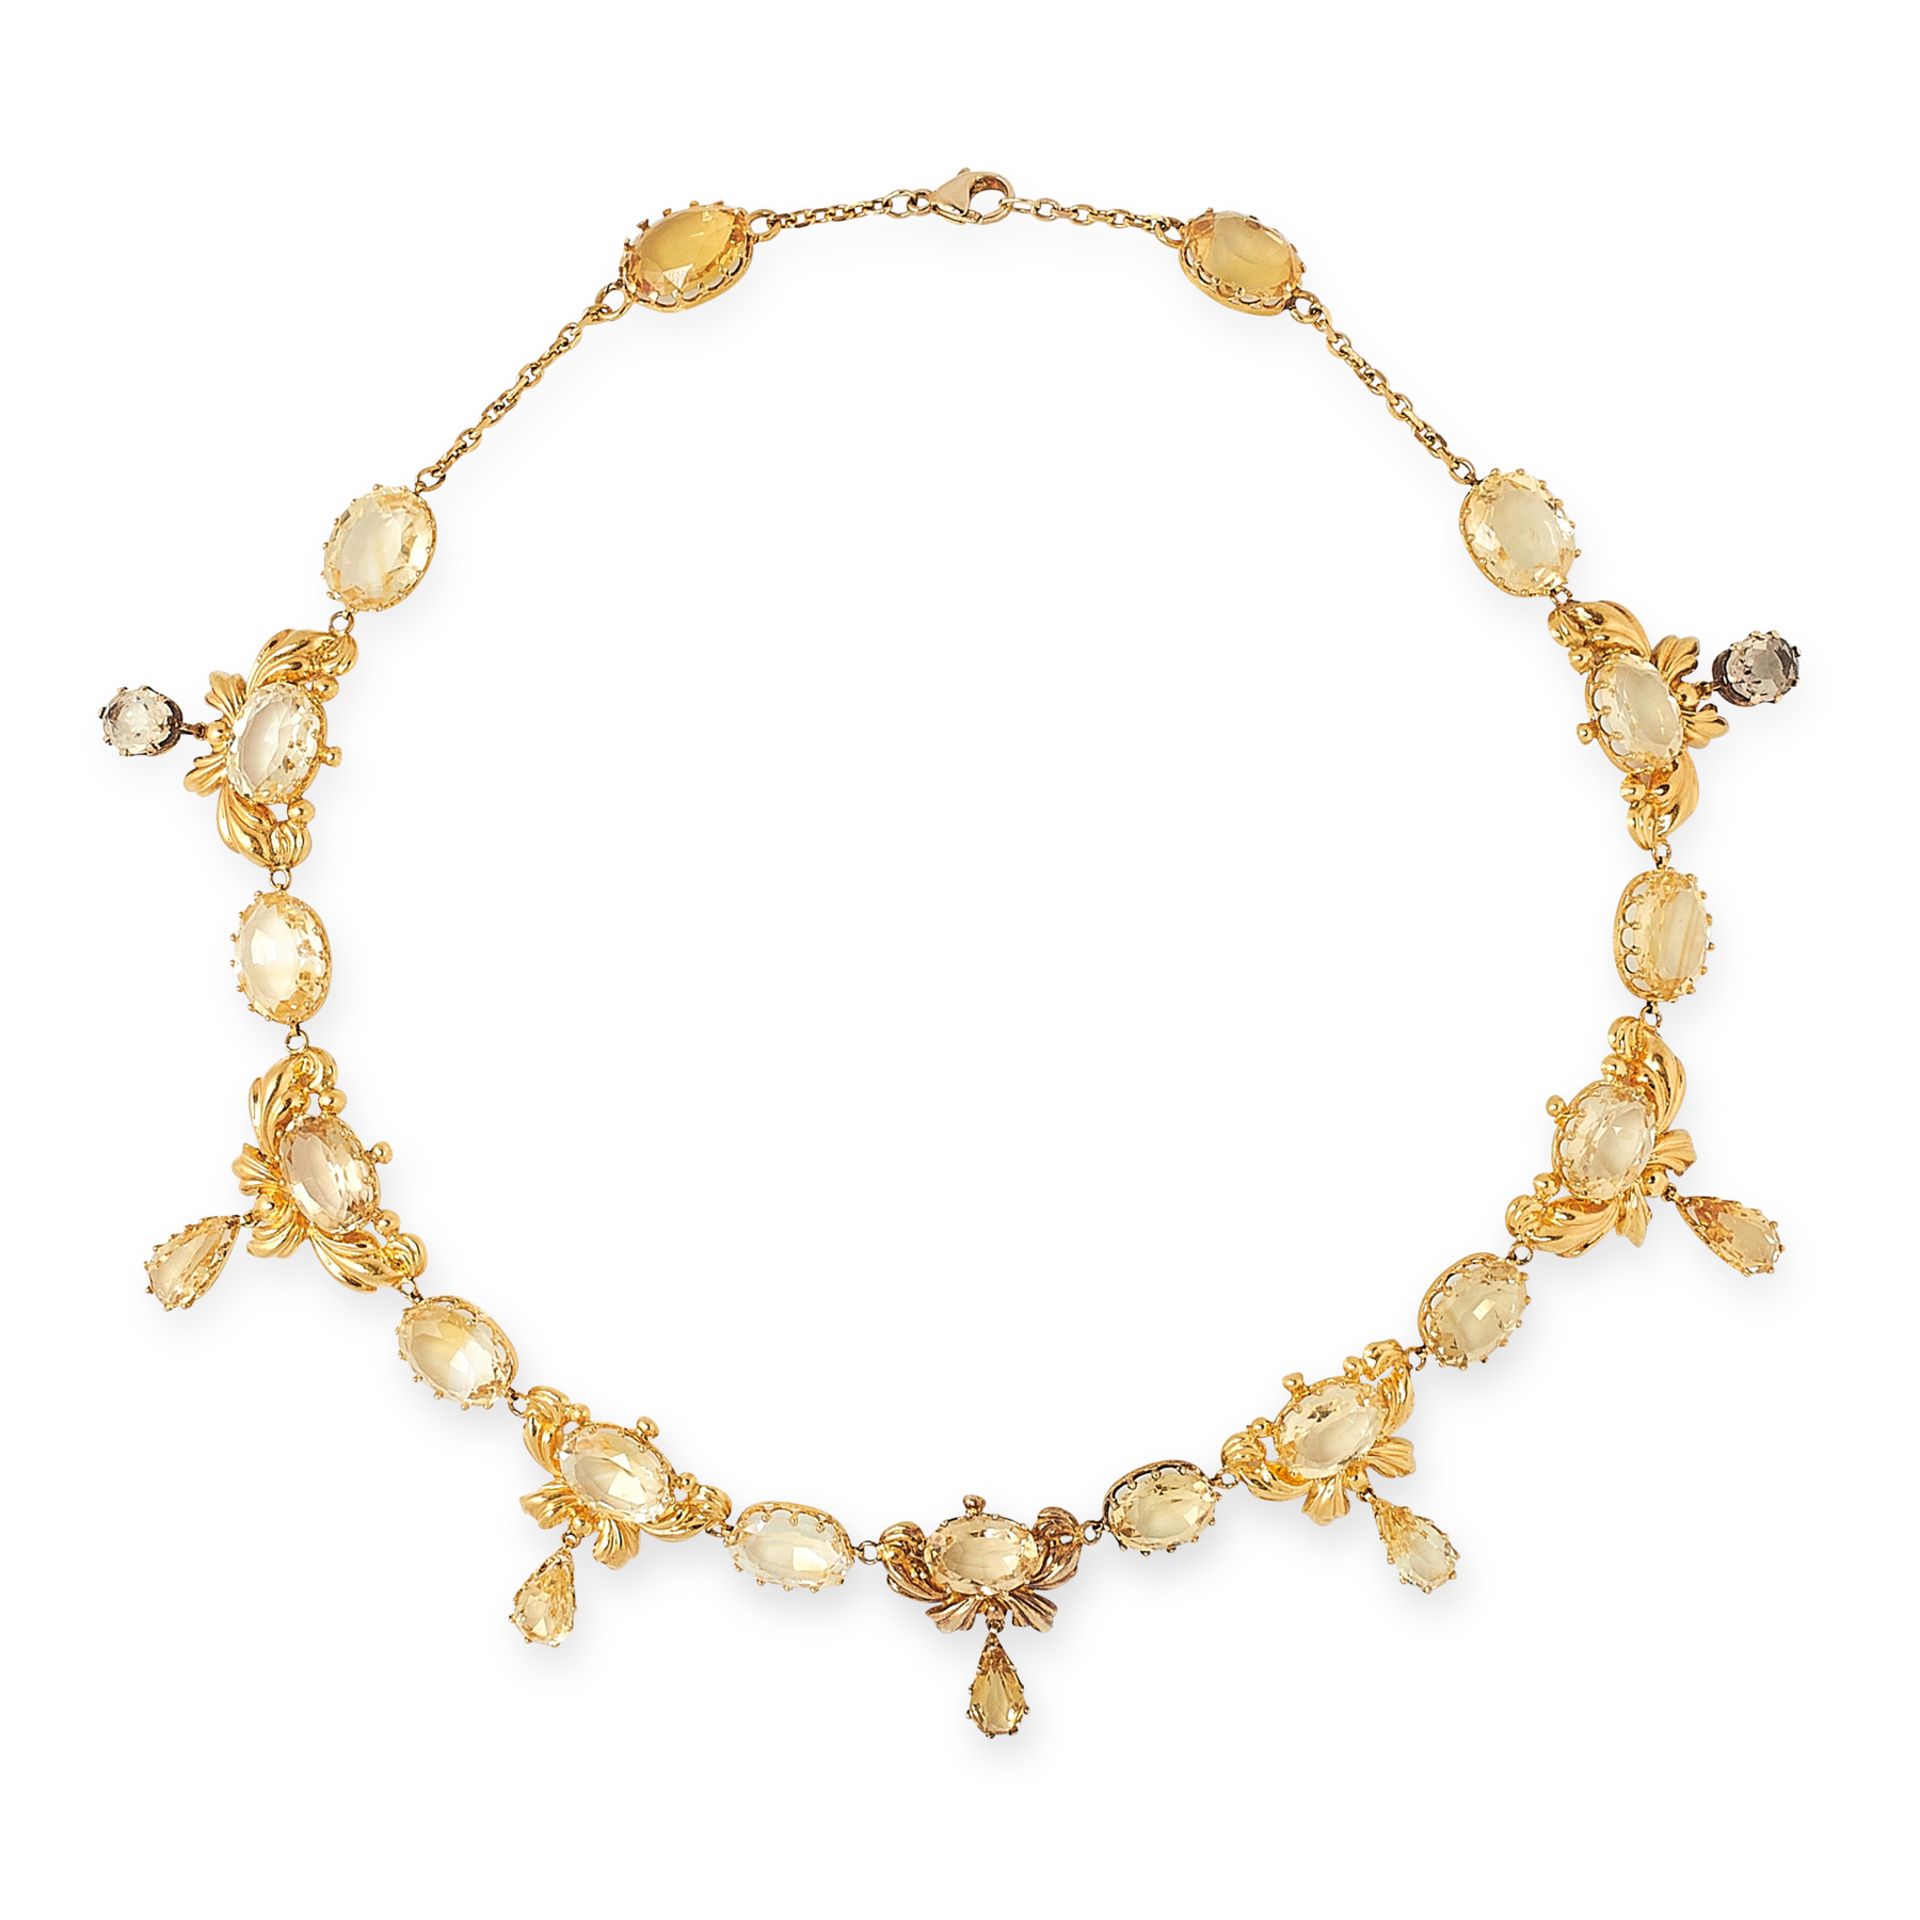 AN ANTIQUE CITRINE NECKLACE in high carat yellow gold, comprising a row of oval cut citrines